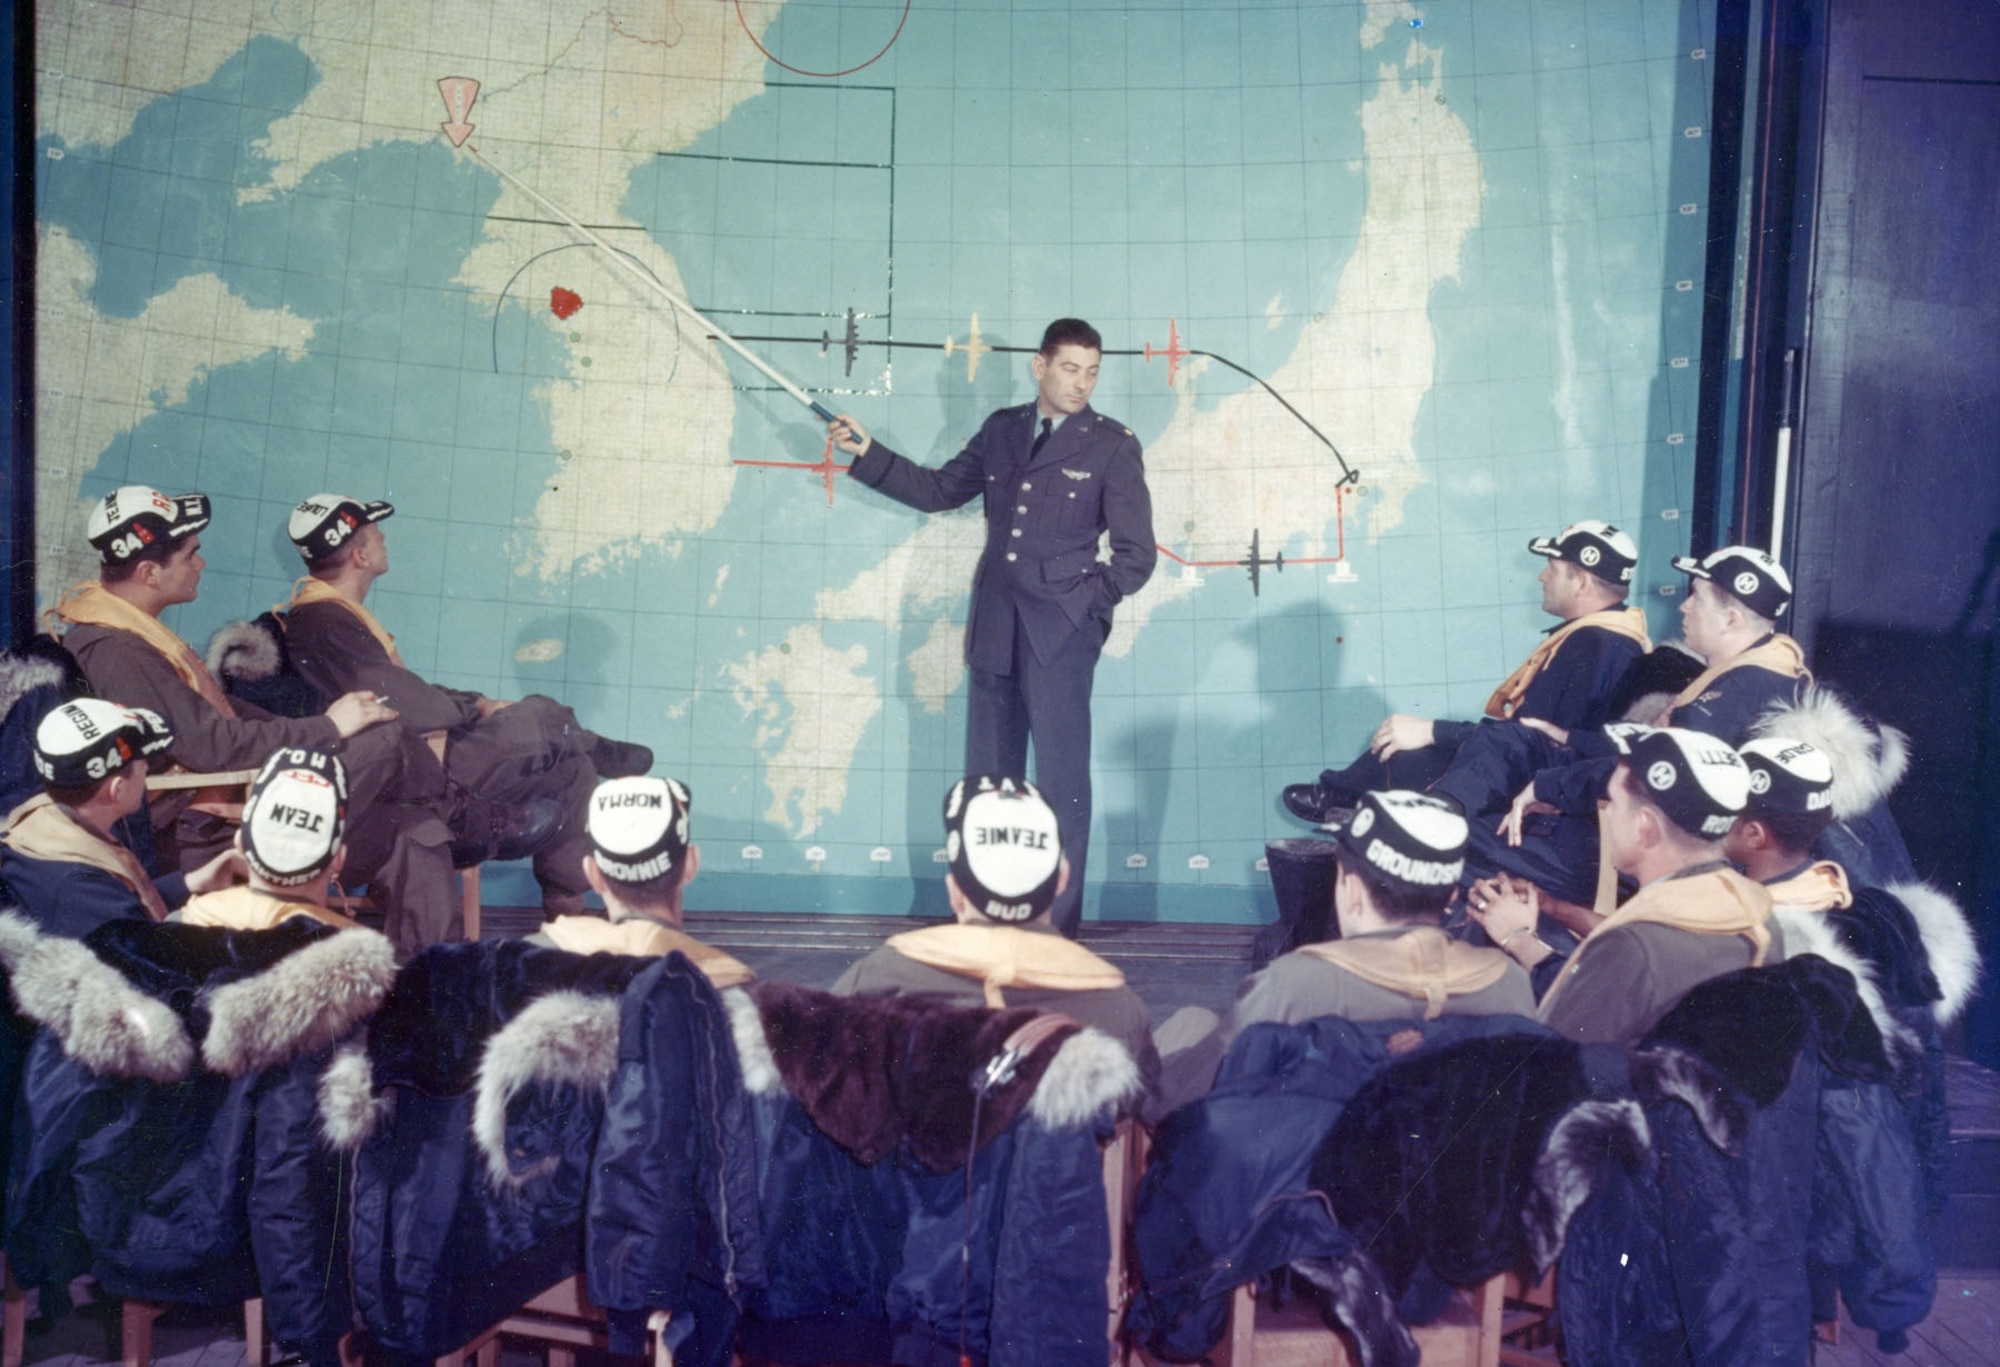 Maj. Harry Bailey points out the often-visited target of Sinuiju, North Korea. On the right of the map is a red dot that represents their starting point, Yokota Air Base near Tokyo, Japan. (U.S. Air Force photo)